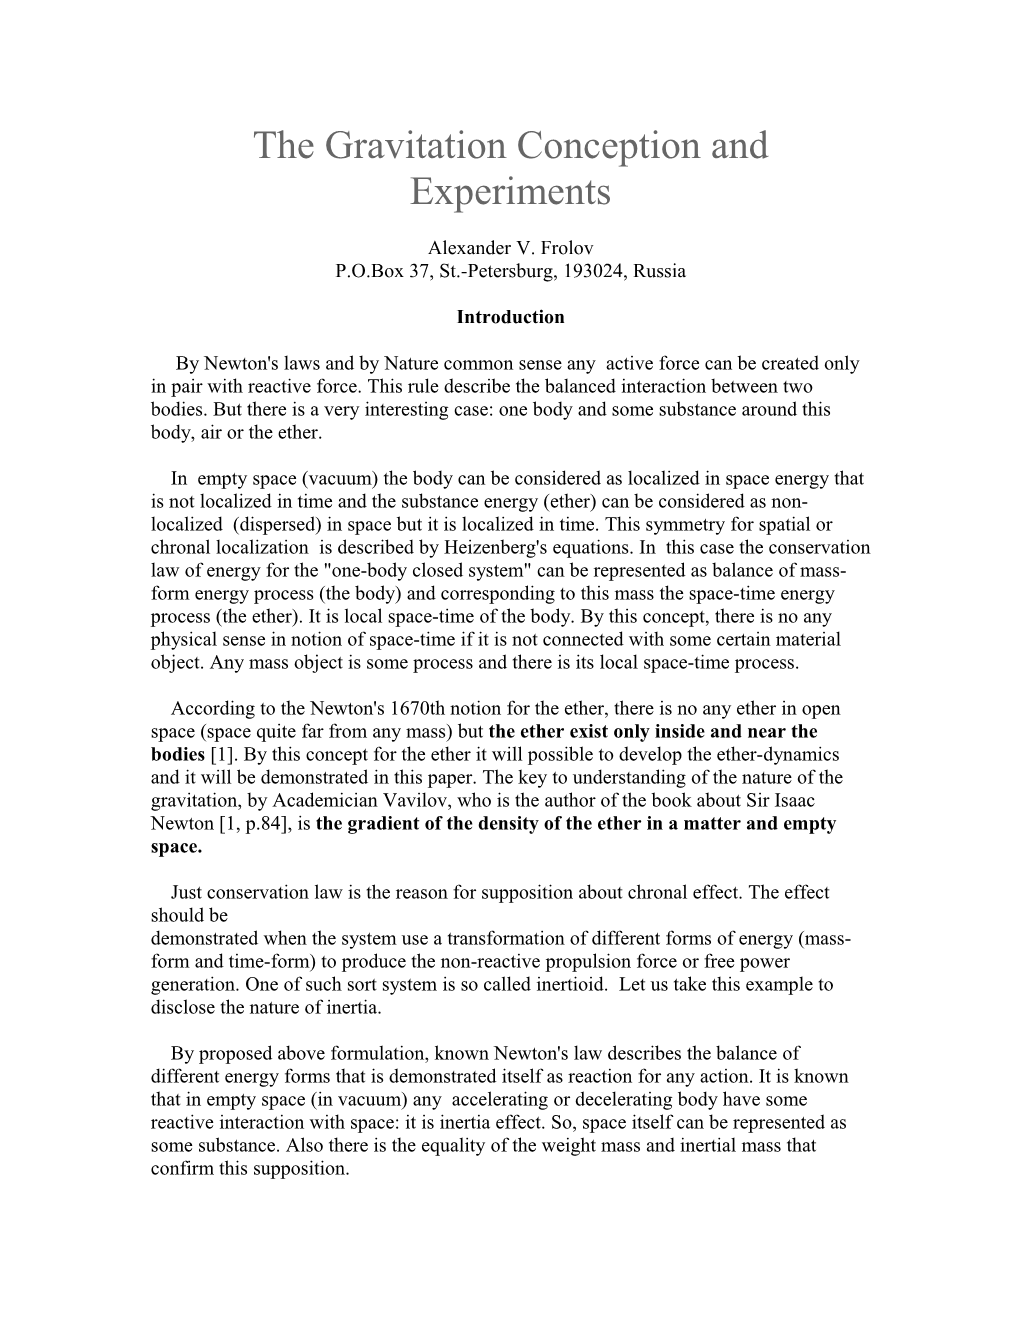 The Gravitation Conception and Experiments